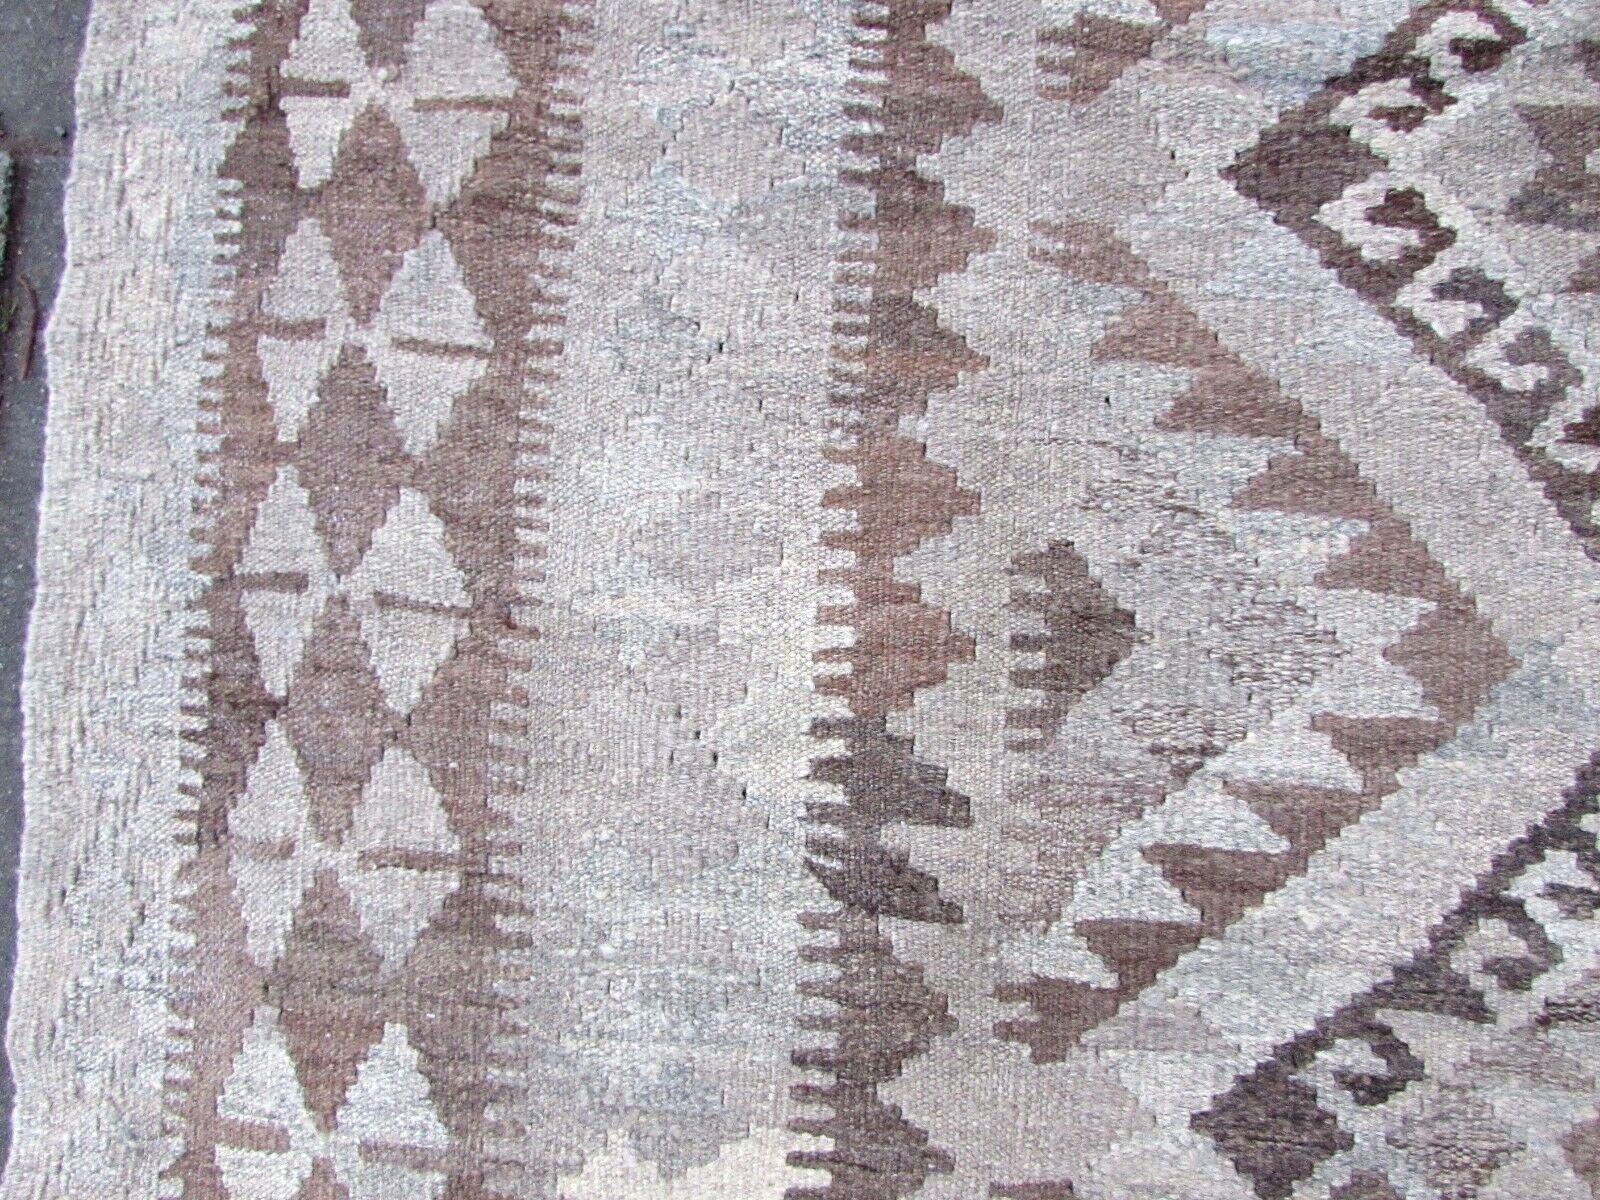 Handmade vintage Aghan flat-weave rug in white, gray and brown wool. It is from the end of 20th century in original good condition.

- Condition: original good,

- circa 1970s,

- Size: 6' x 8.5' (185cm x 260cm),

- Material: wool,

-